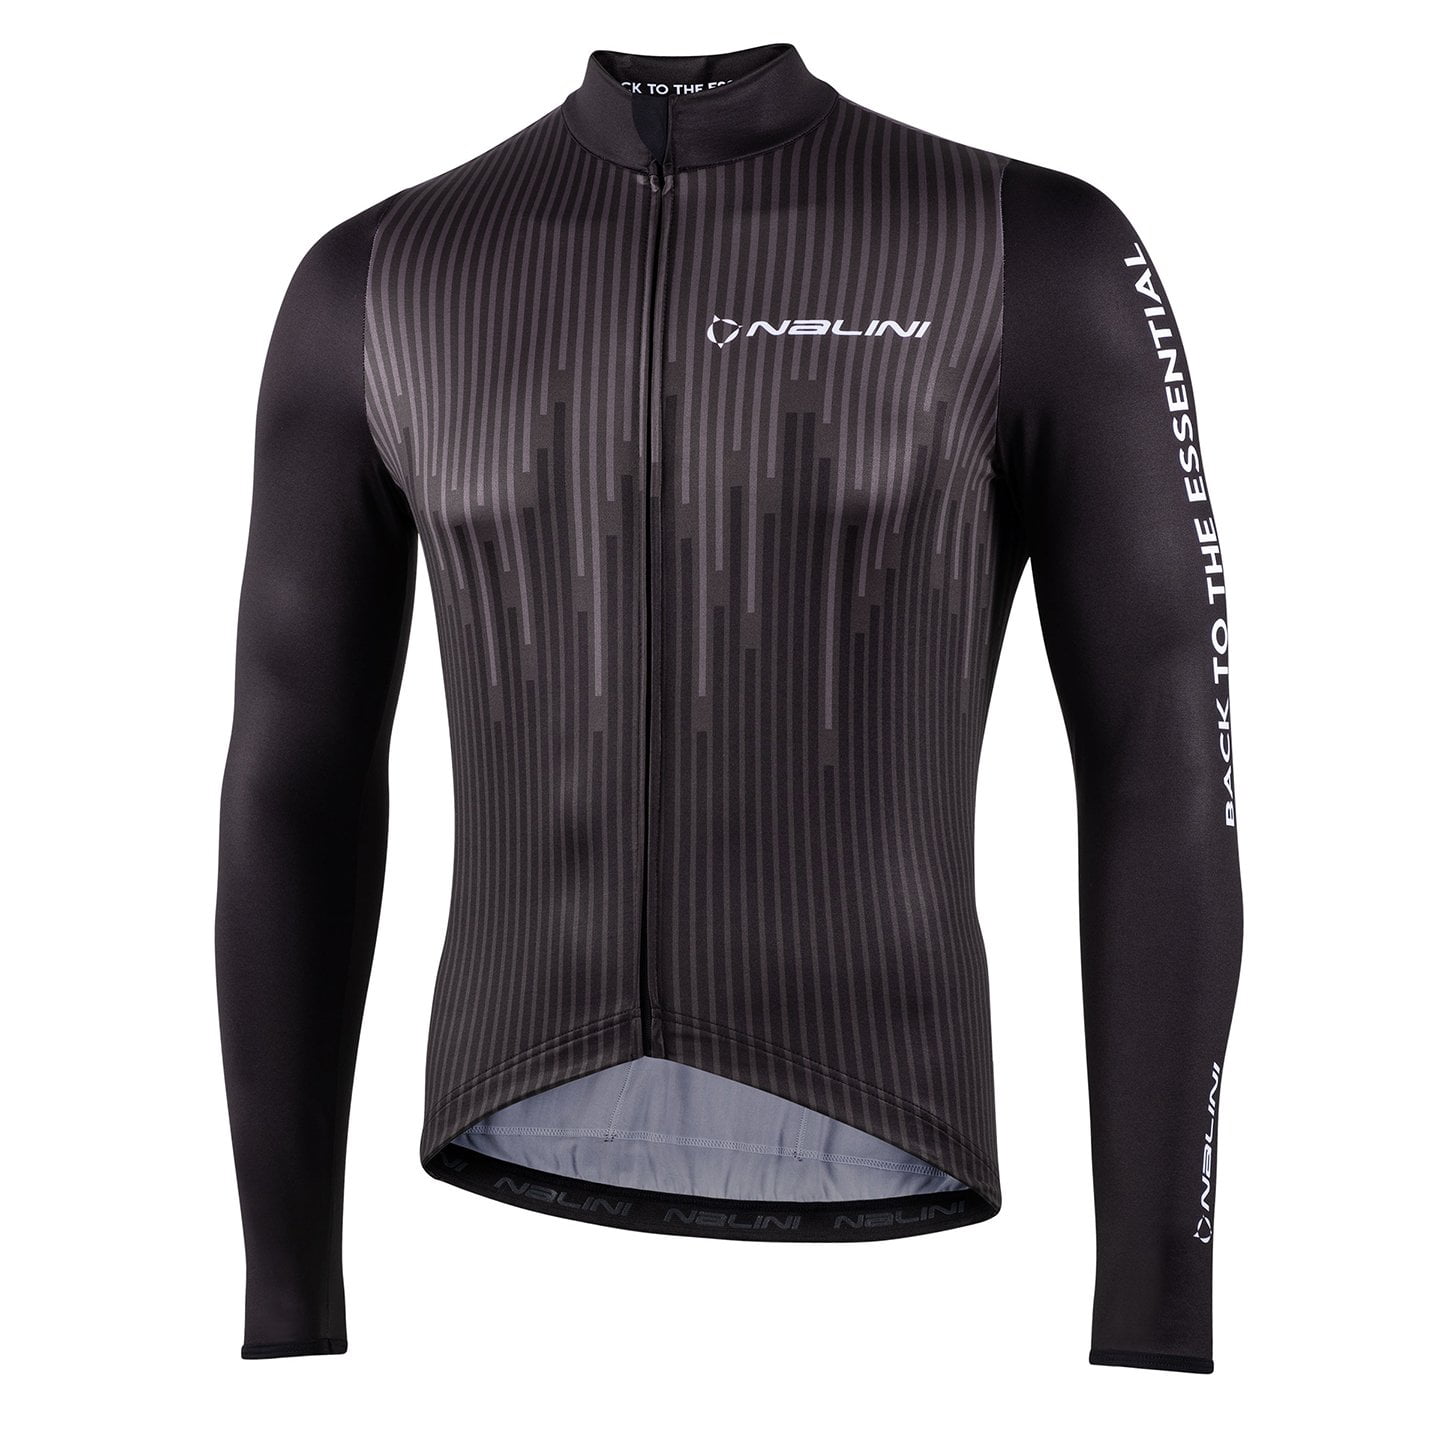 NALINI Fit Long Sleeve Jersey Long Sleeve Jersey, for men, size L, Cycling jersey, Cycling clothing